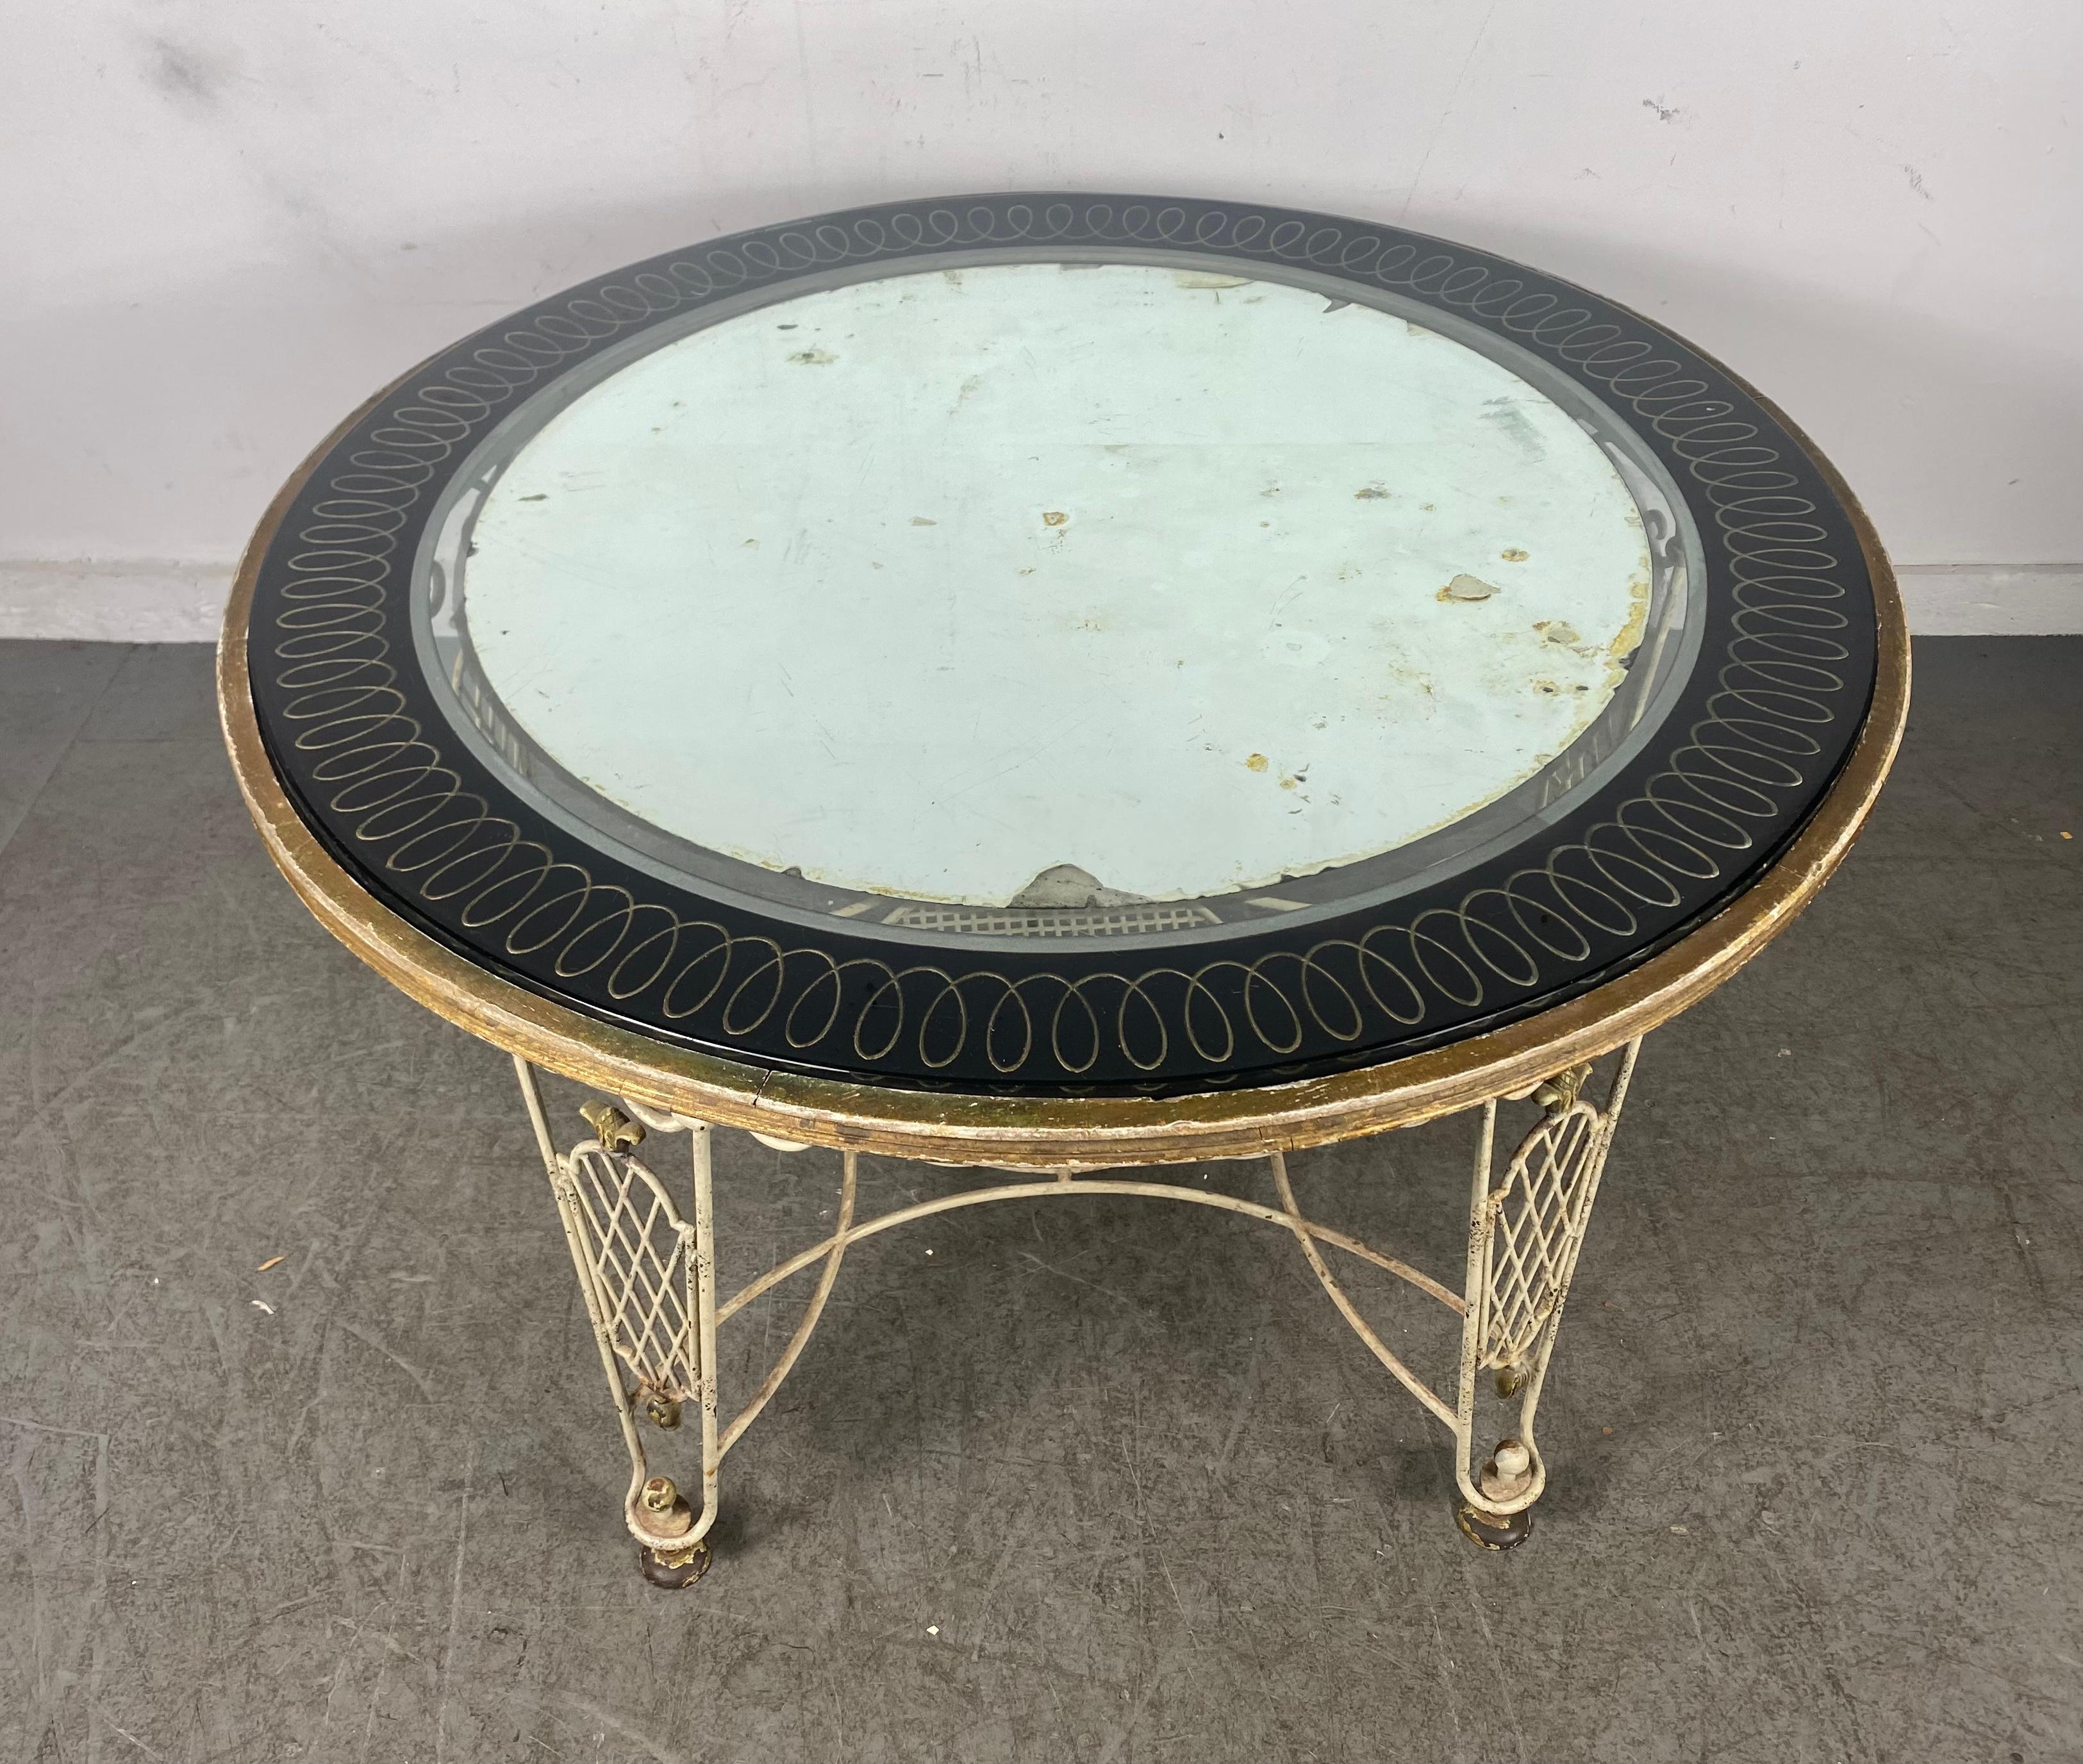 1940's Modernist French Iron Verre Eglomise Mirror Cocktail Table, Regency For Sale 1